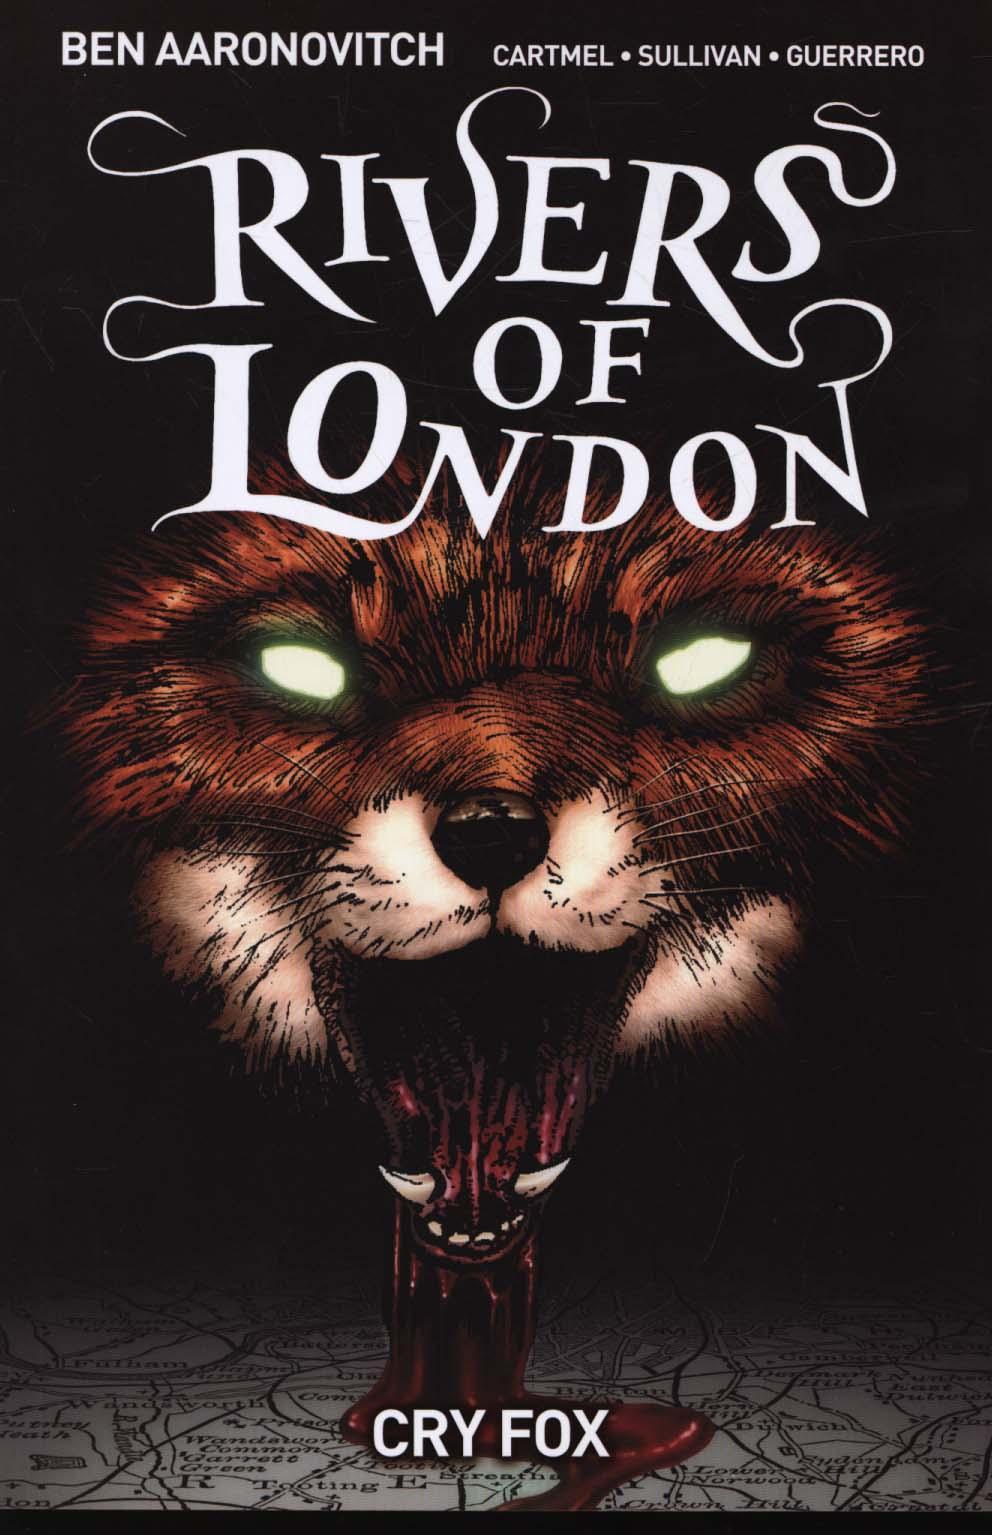 Rivers of London Volume 5: Cry Fox